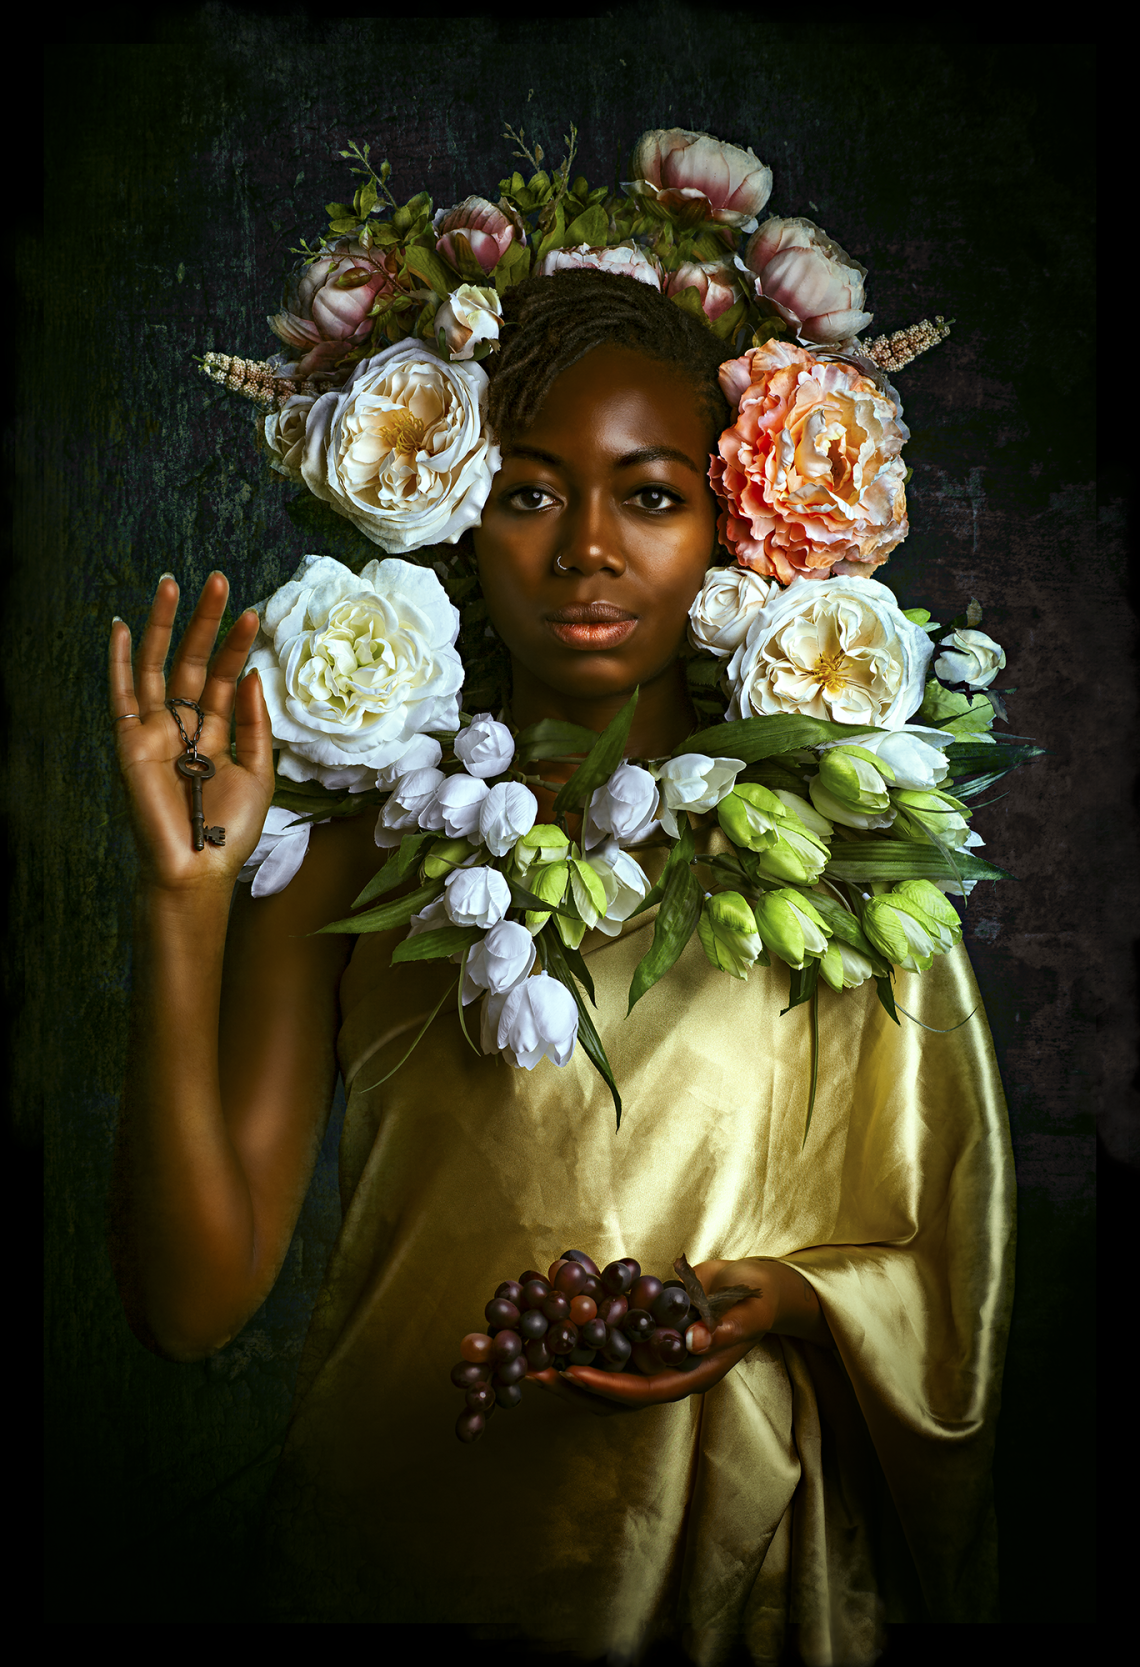 Black woman with flowers, holding grapes